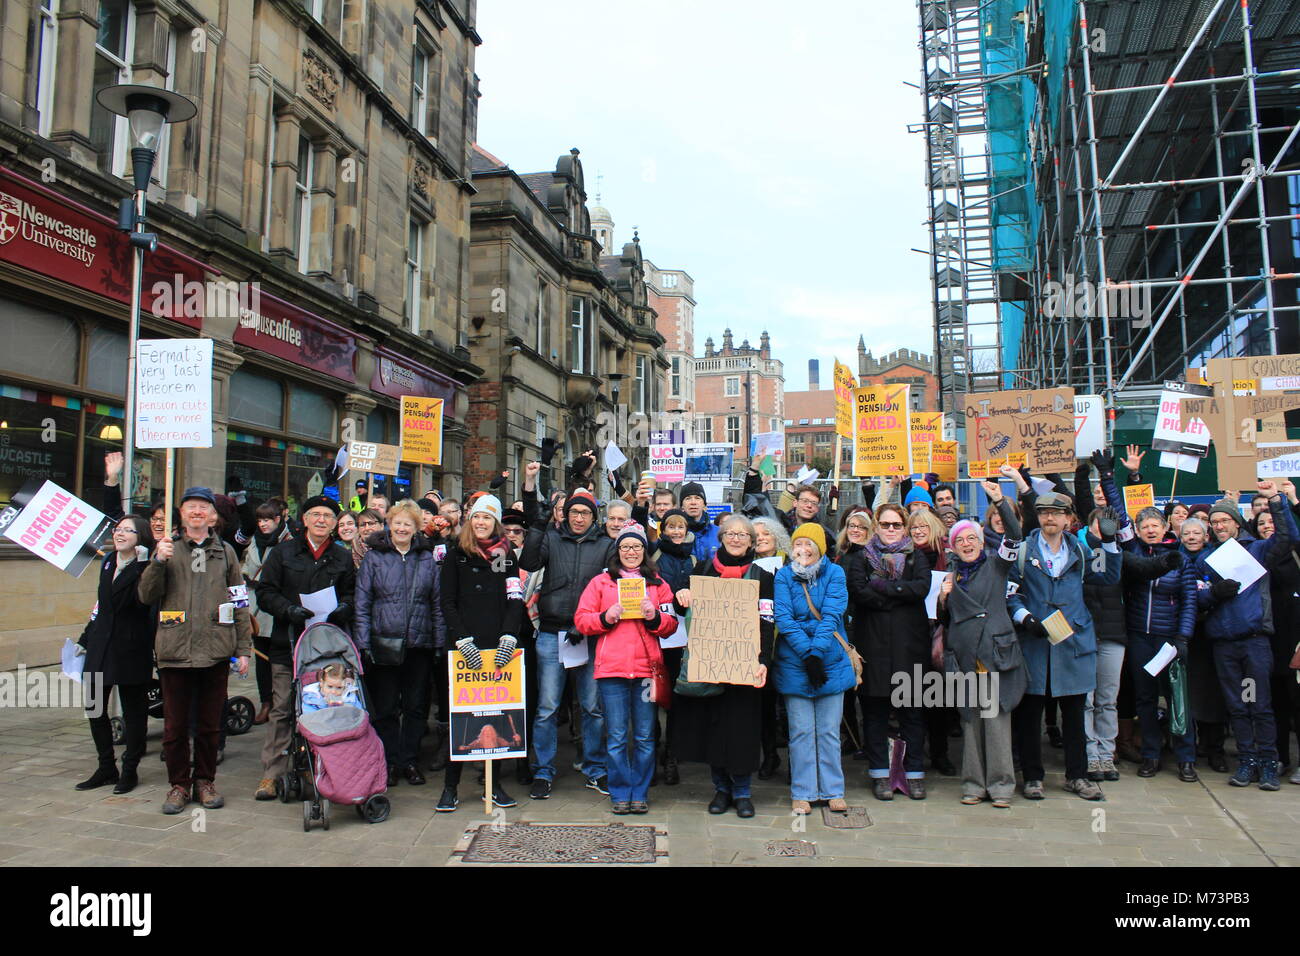 Newcastle, UK. 8th March, 2018. Newcastle University Lecturers on Strike about Pensions. UK, March 8th, 2018, David Whinham/Alamy Live News Stock Photo